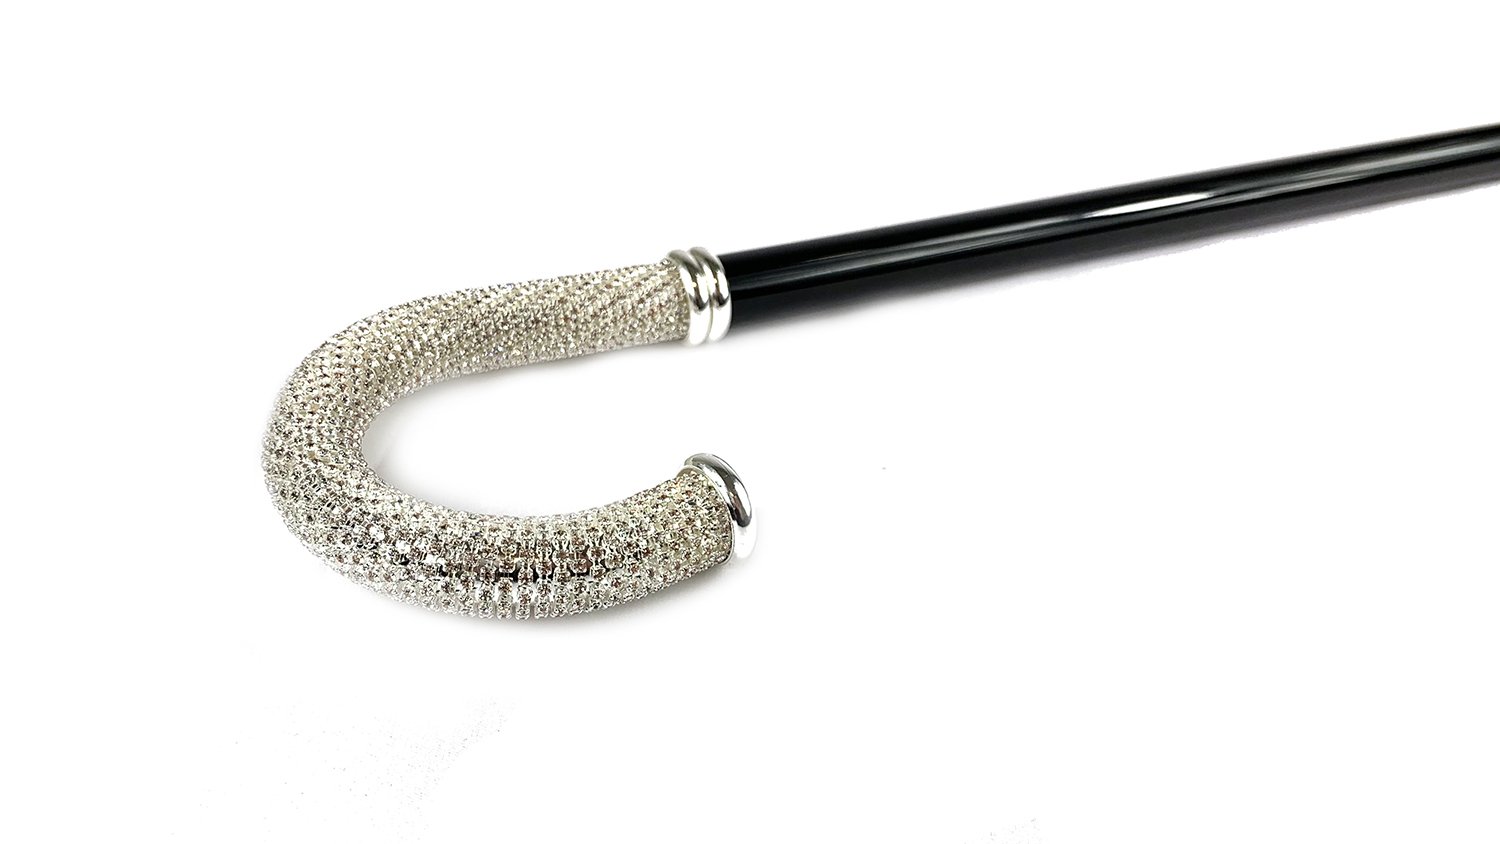 Luxury Walking stick for Man with thousands of white crystals